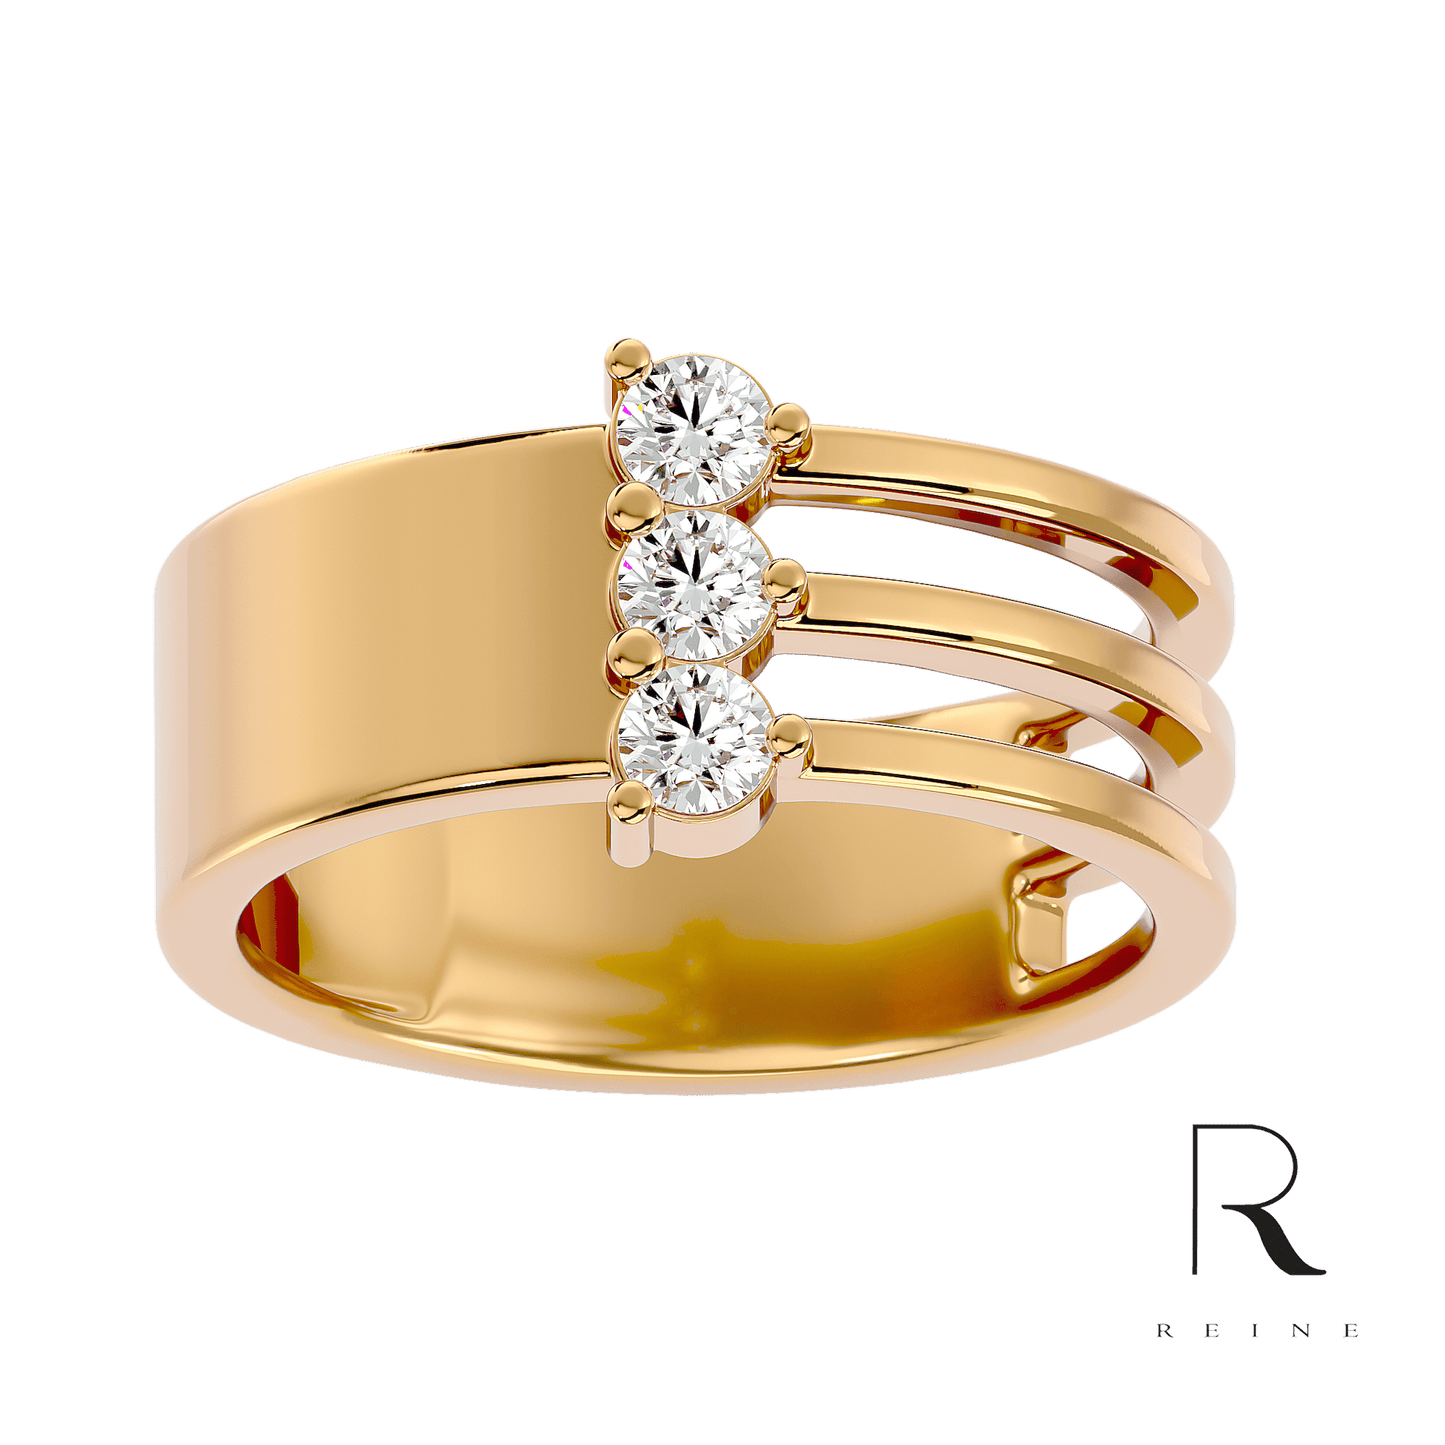 3 diamonds ring with gold